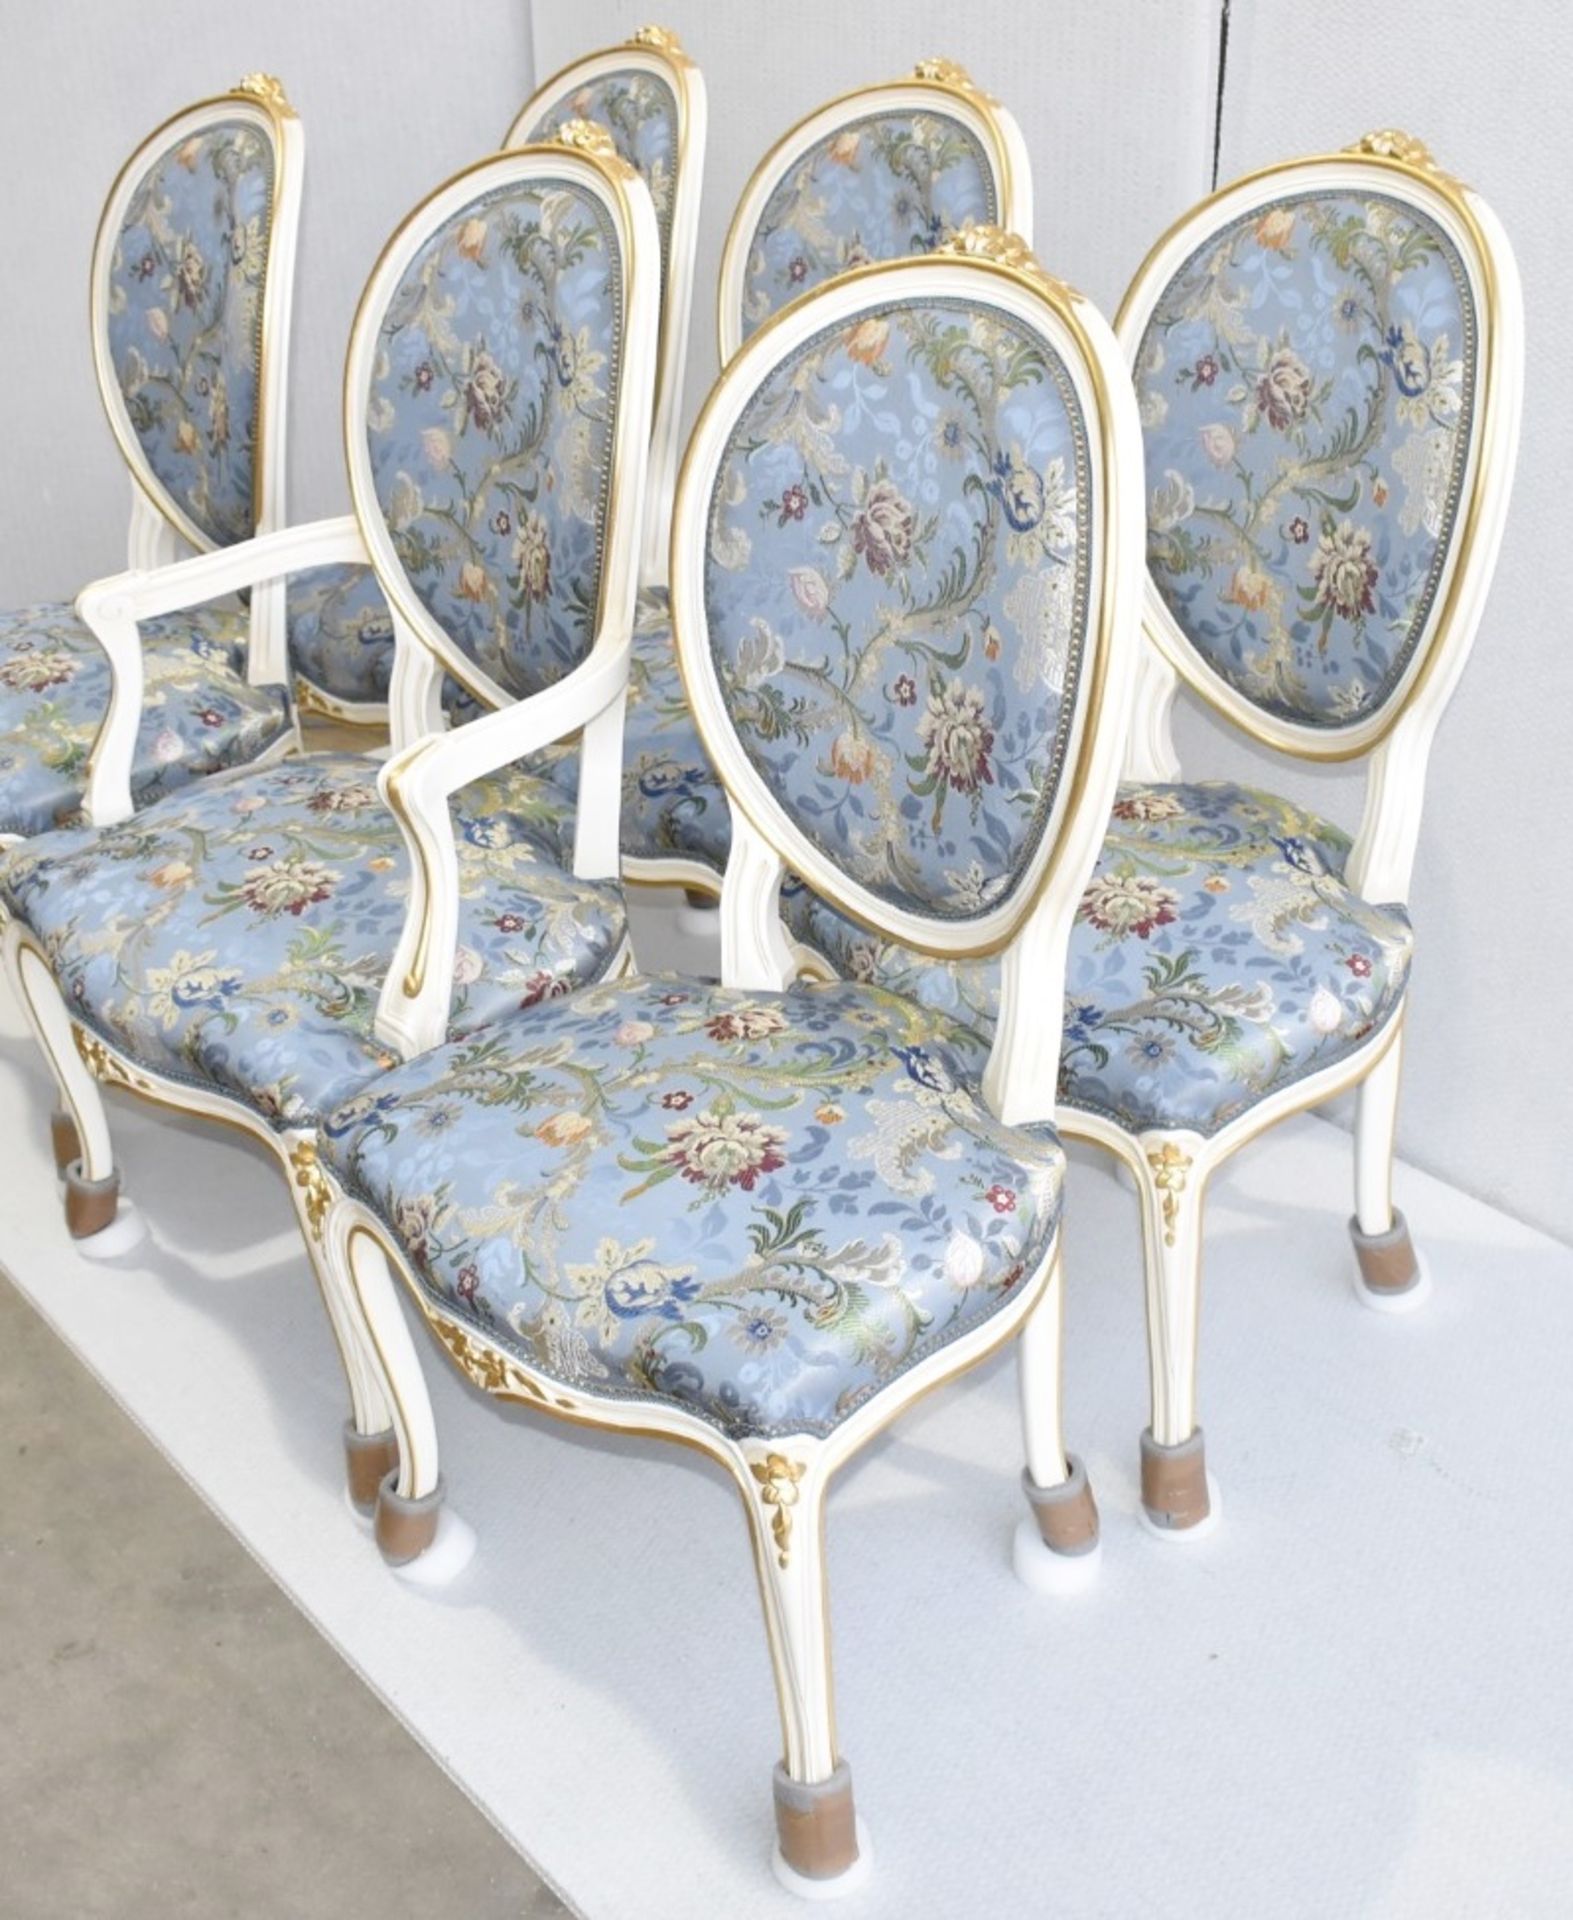 Set of 6 x ANGELO CAPPELLINI 'Timeless' Baroque-style Carved Dining Chairs, Floral Upholstered - Image 9 of 14